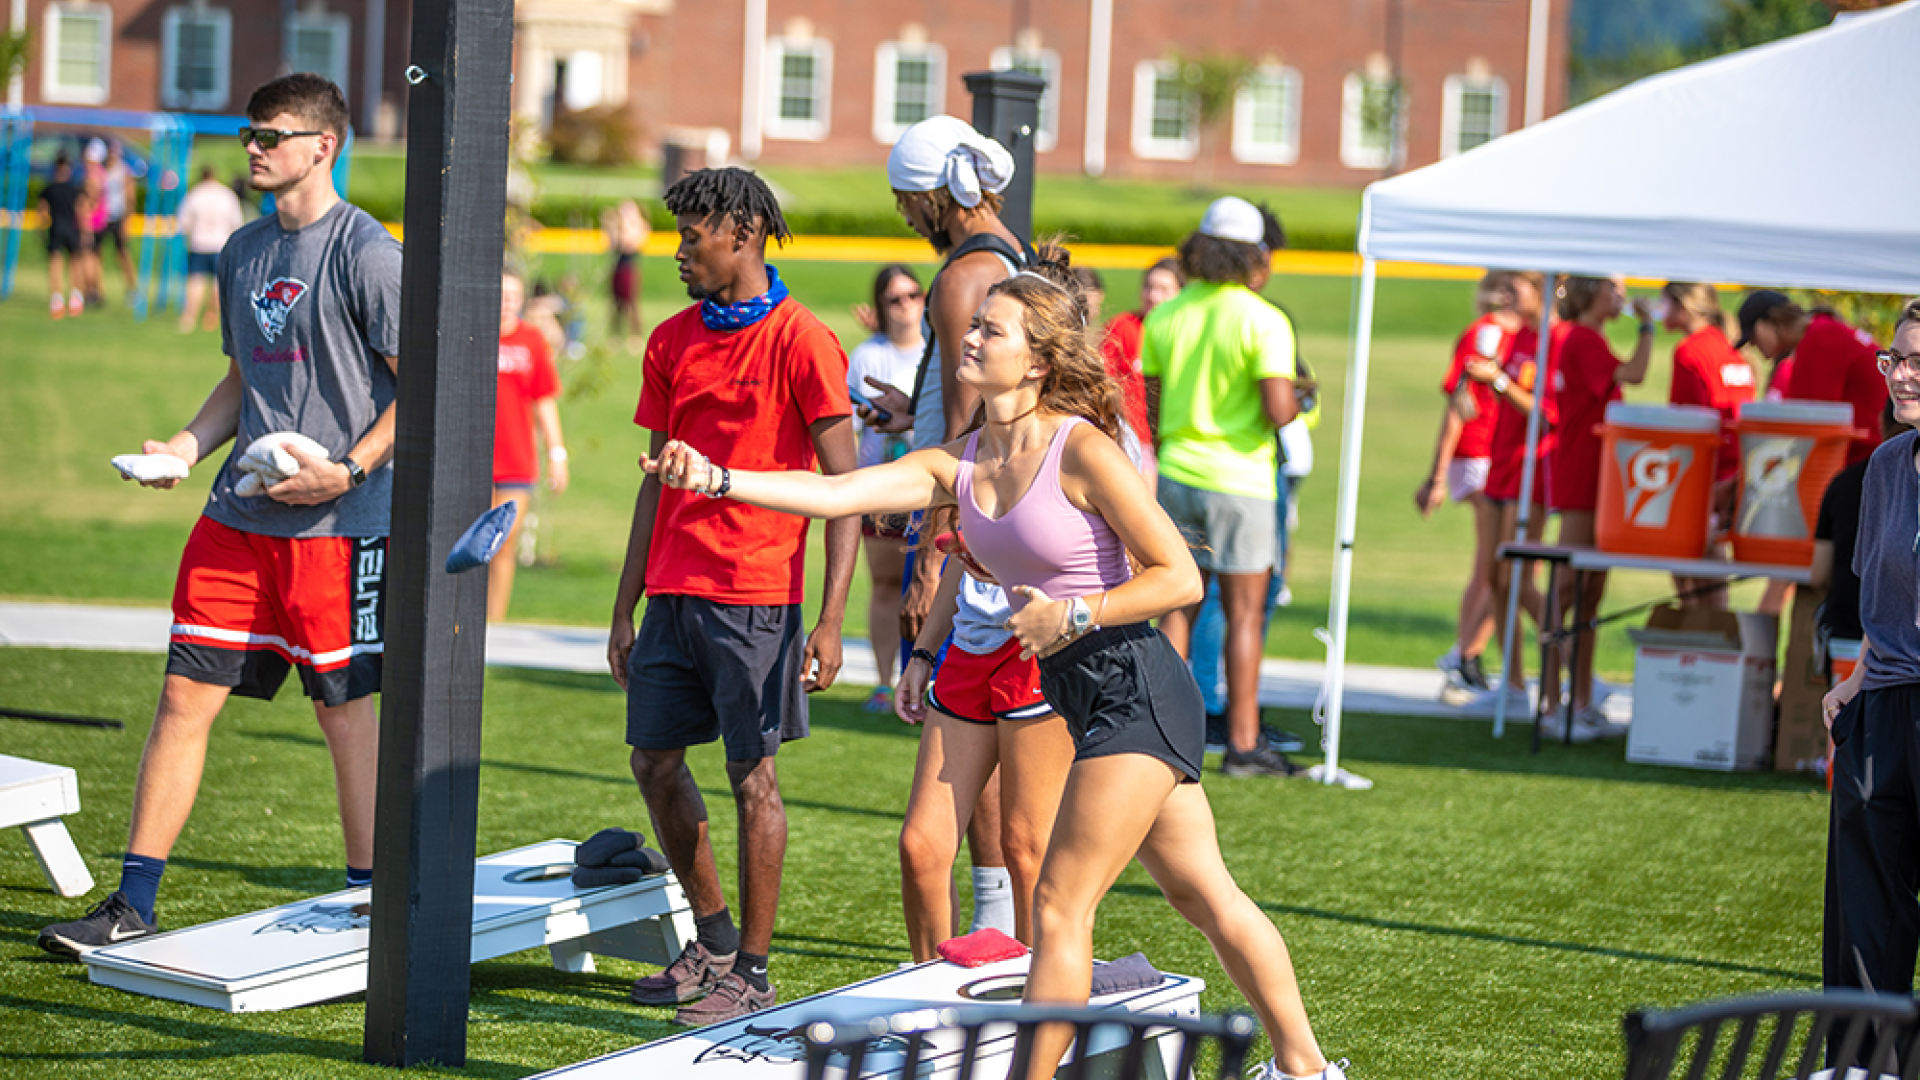 Students playing cornhole at campus event